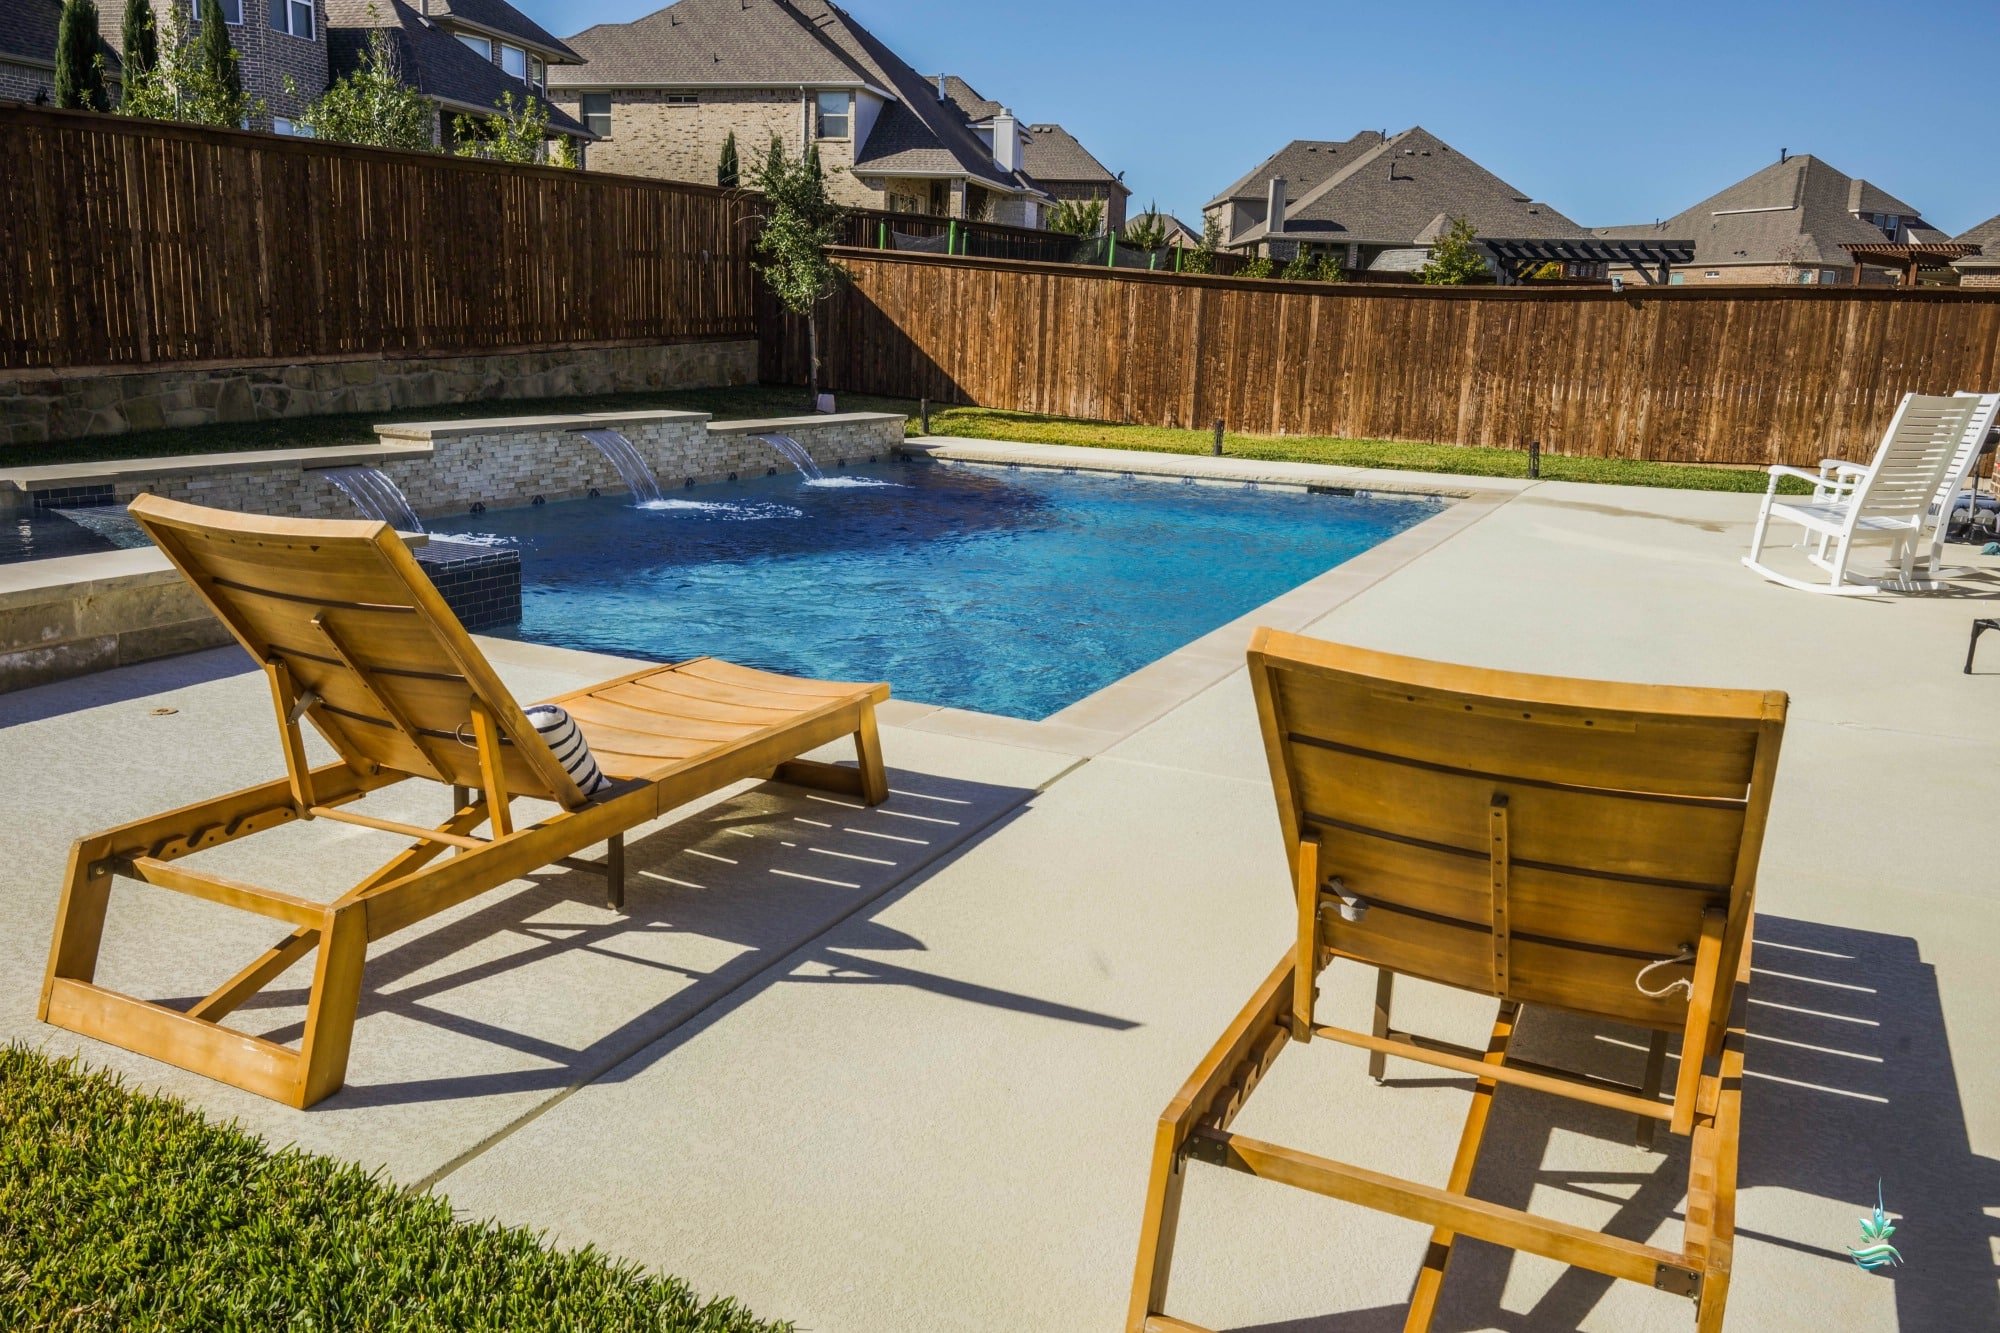 Outdoor pool deck with Adirondack chairs